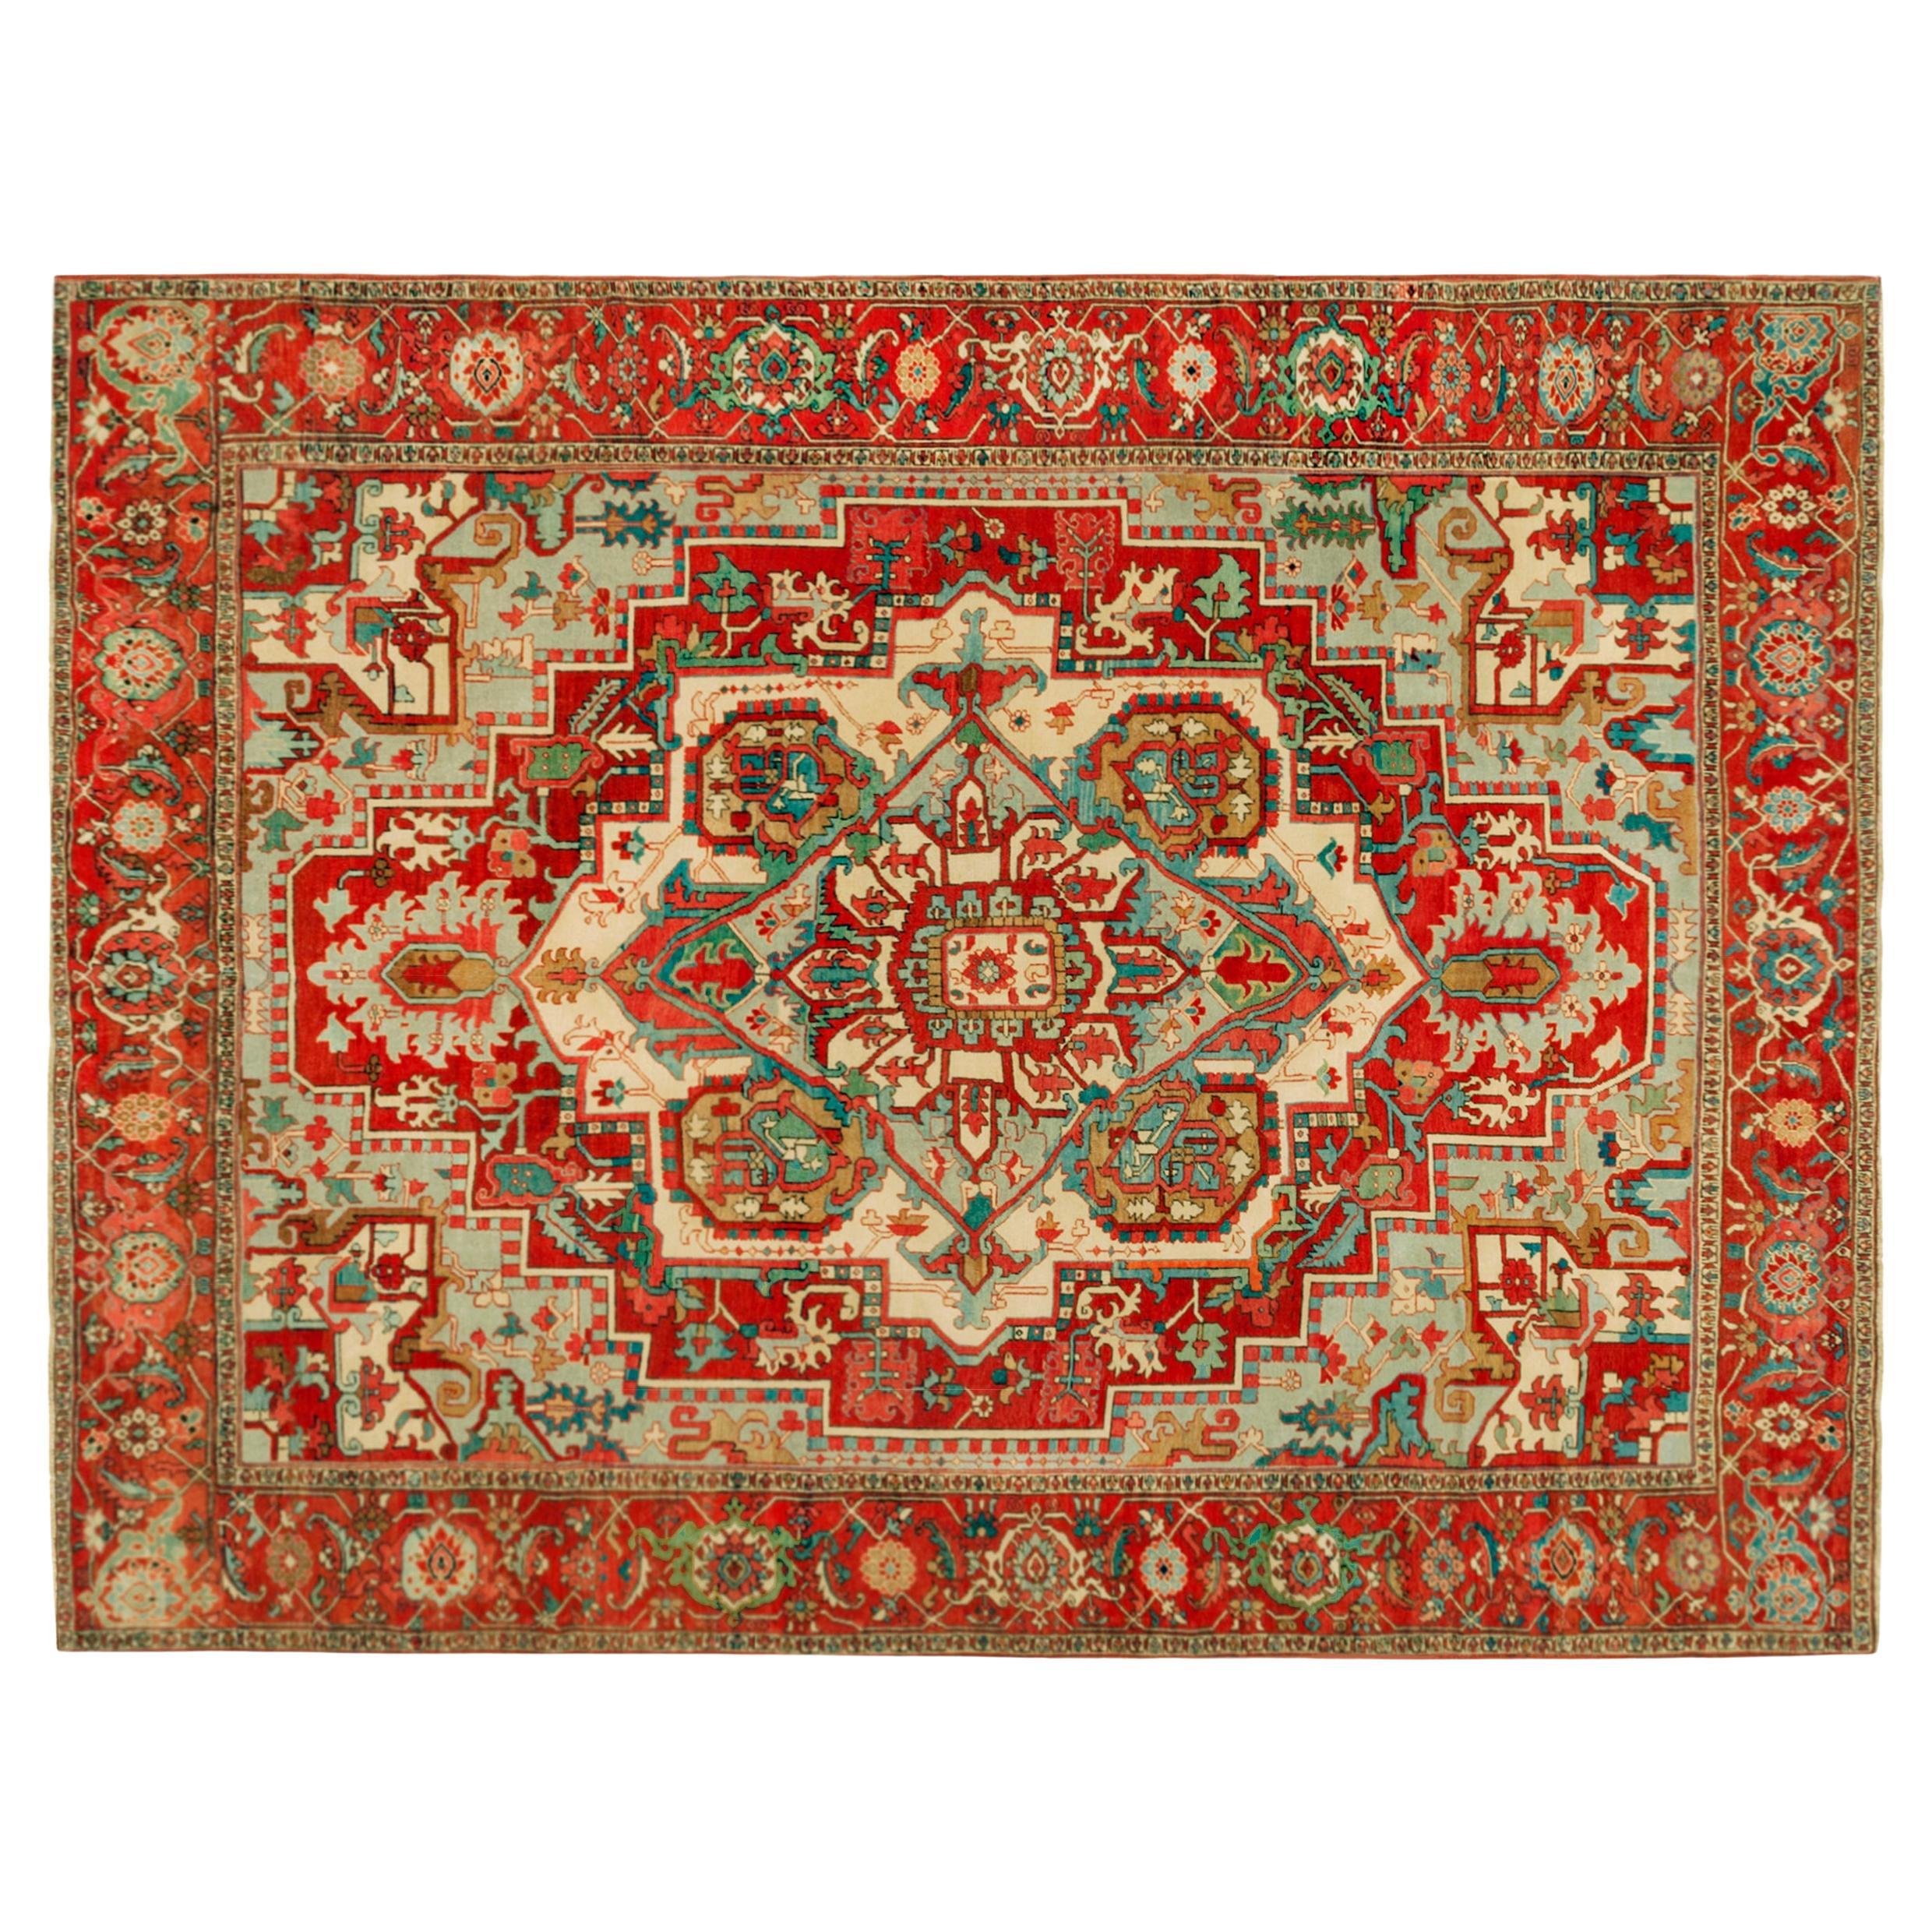 Antique Persian Serapi Oriental Carpet, in Large Size, with Central Medallion